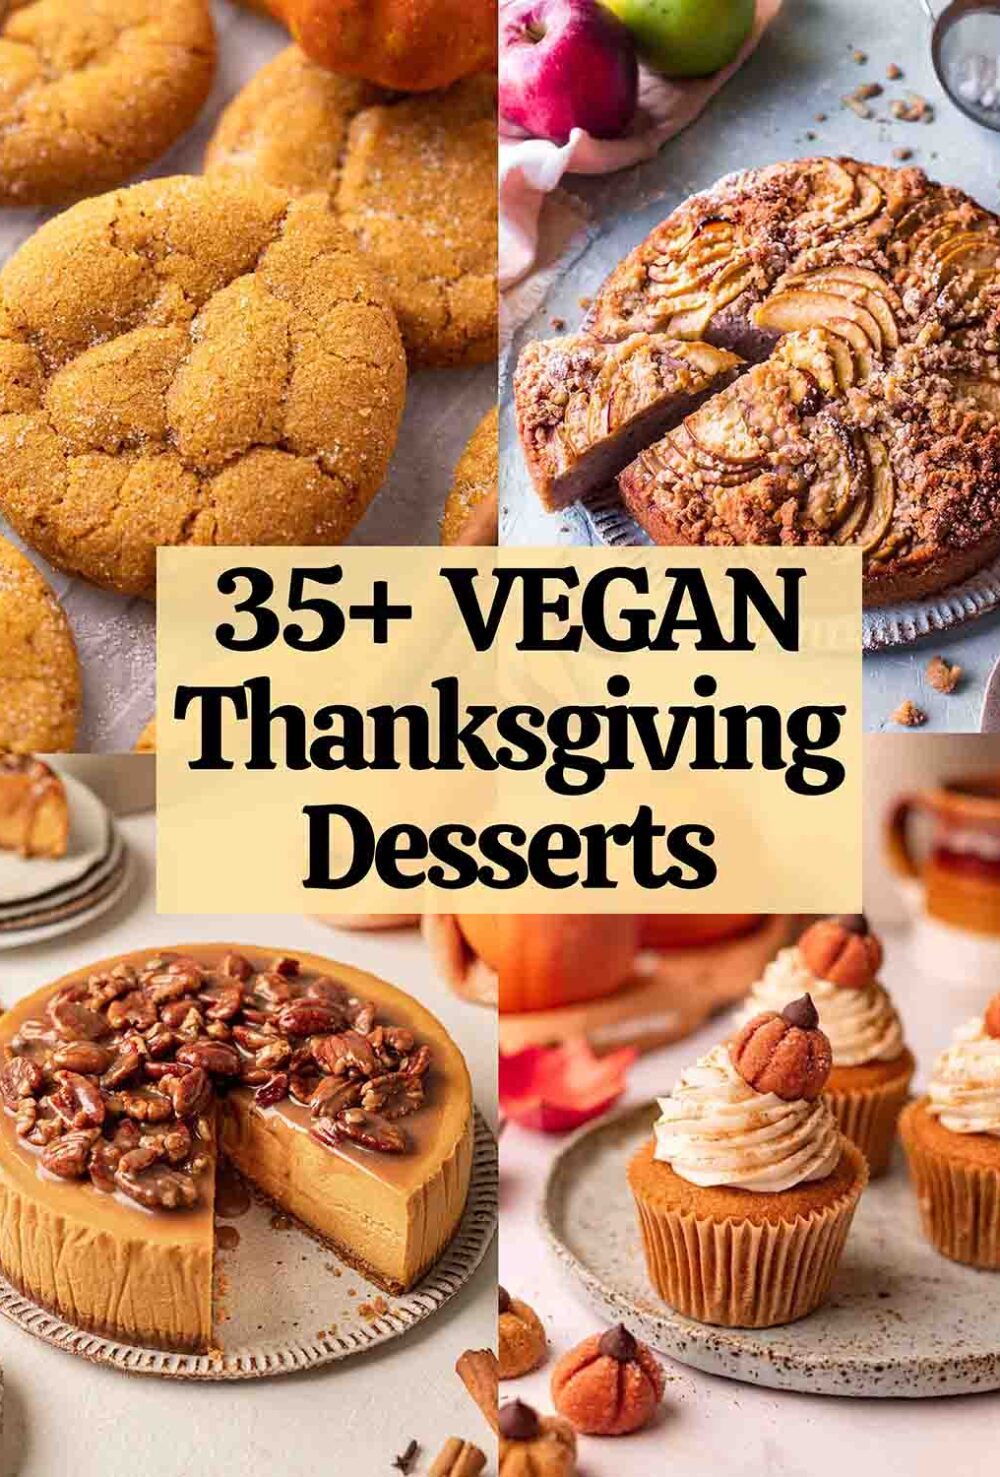 Collage of 4 vegan thanksgiving desserts with text overlay.